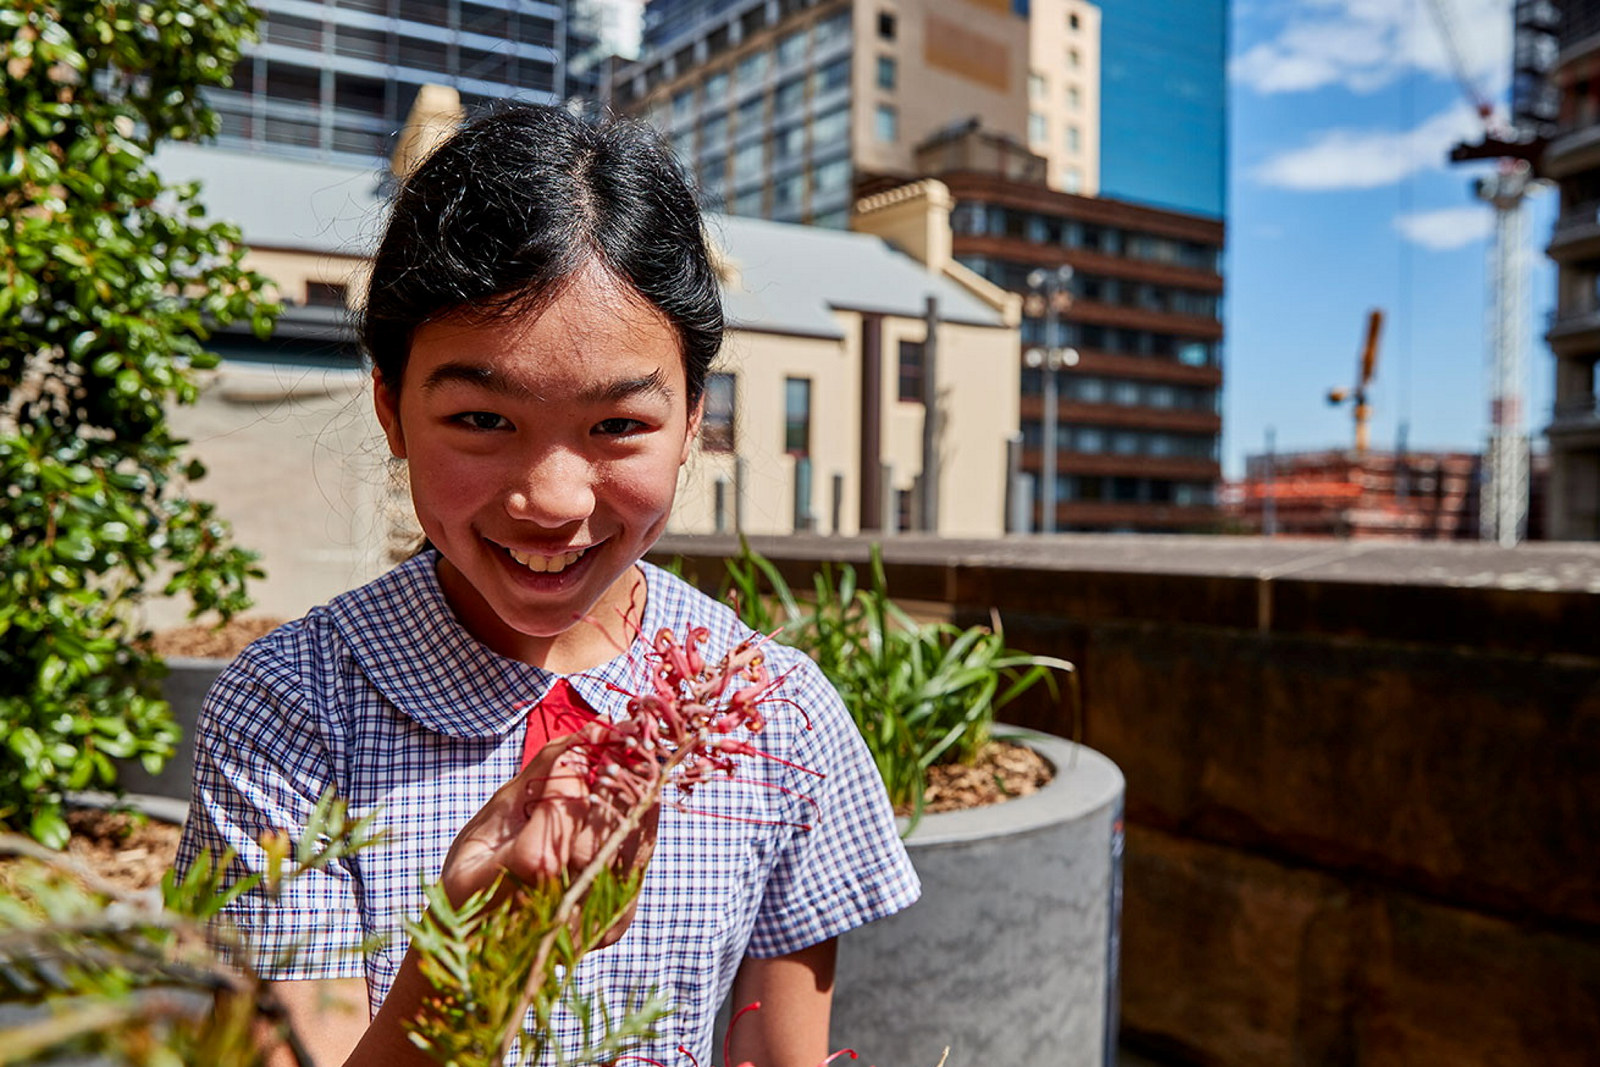 Girl in school uniform eating plant with museum and city buildings in background.